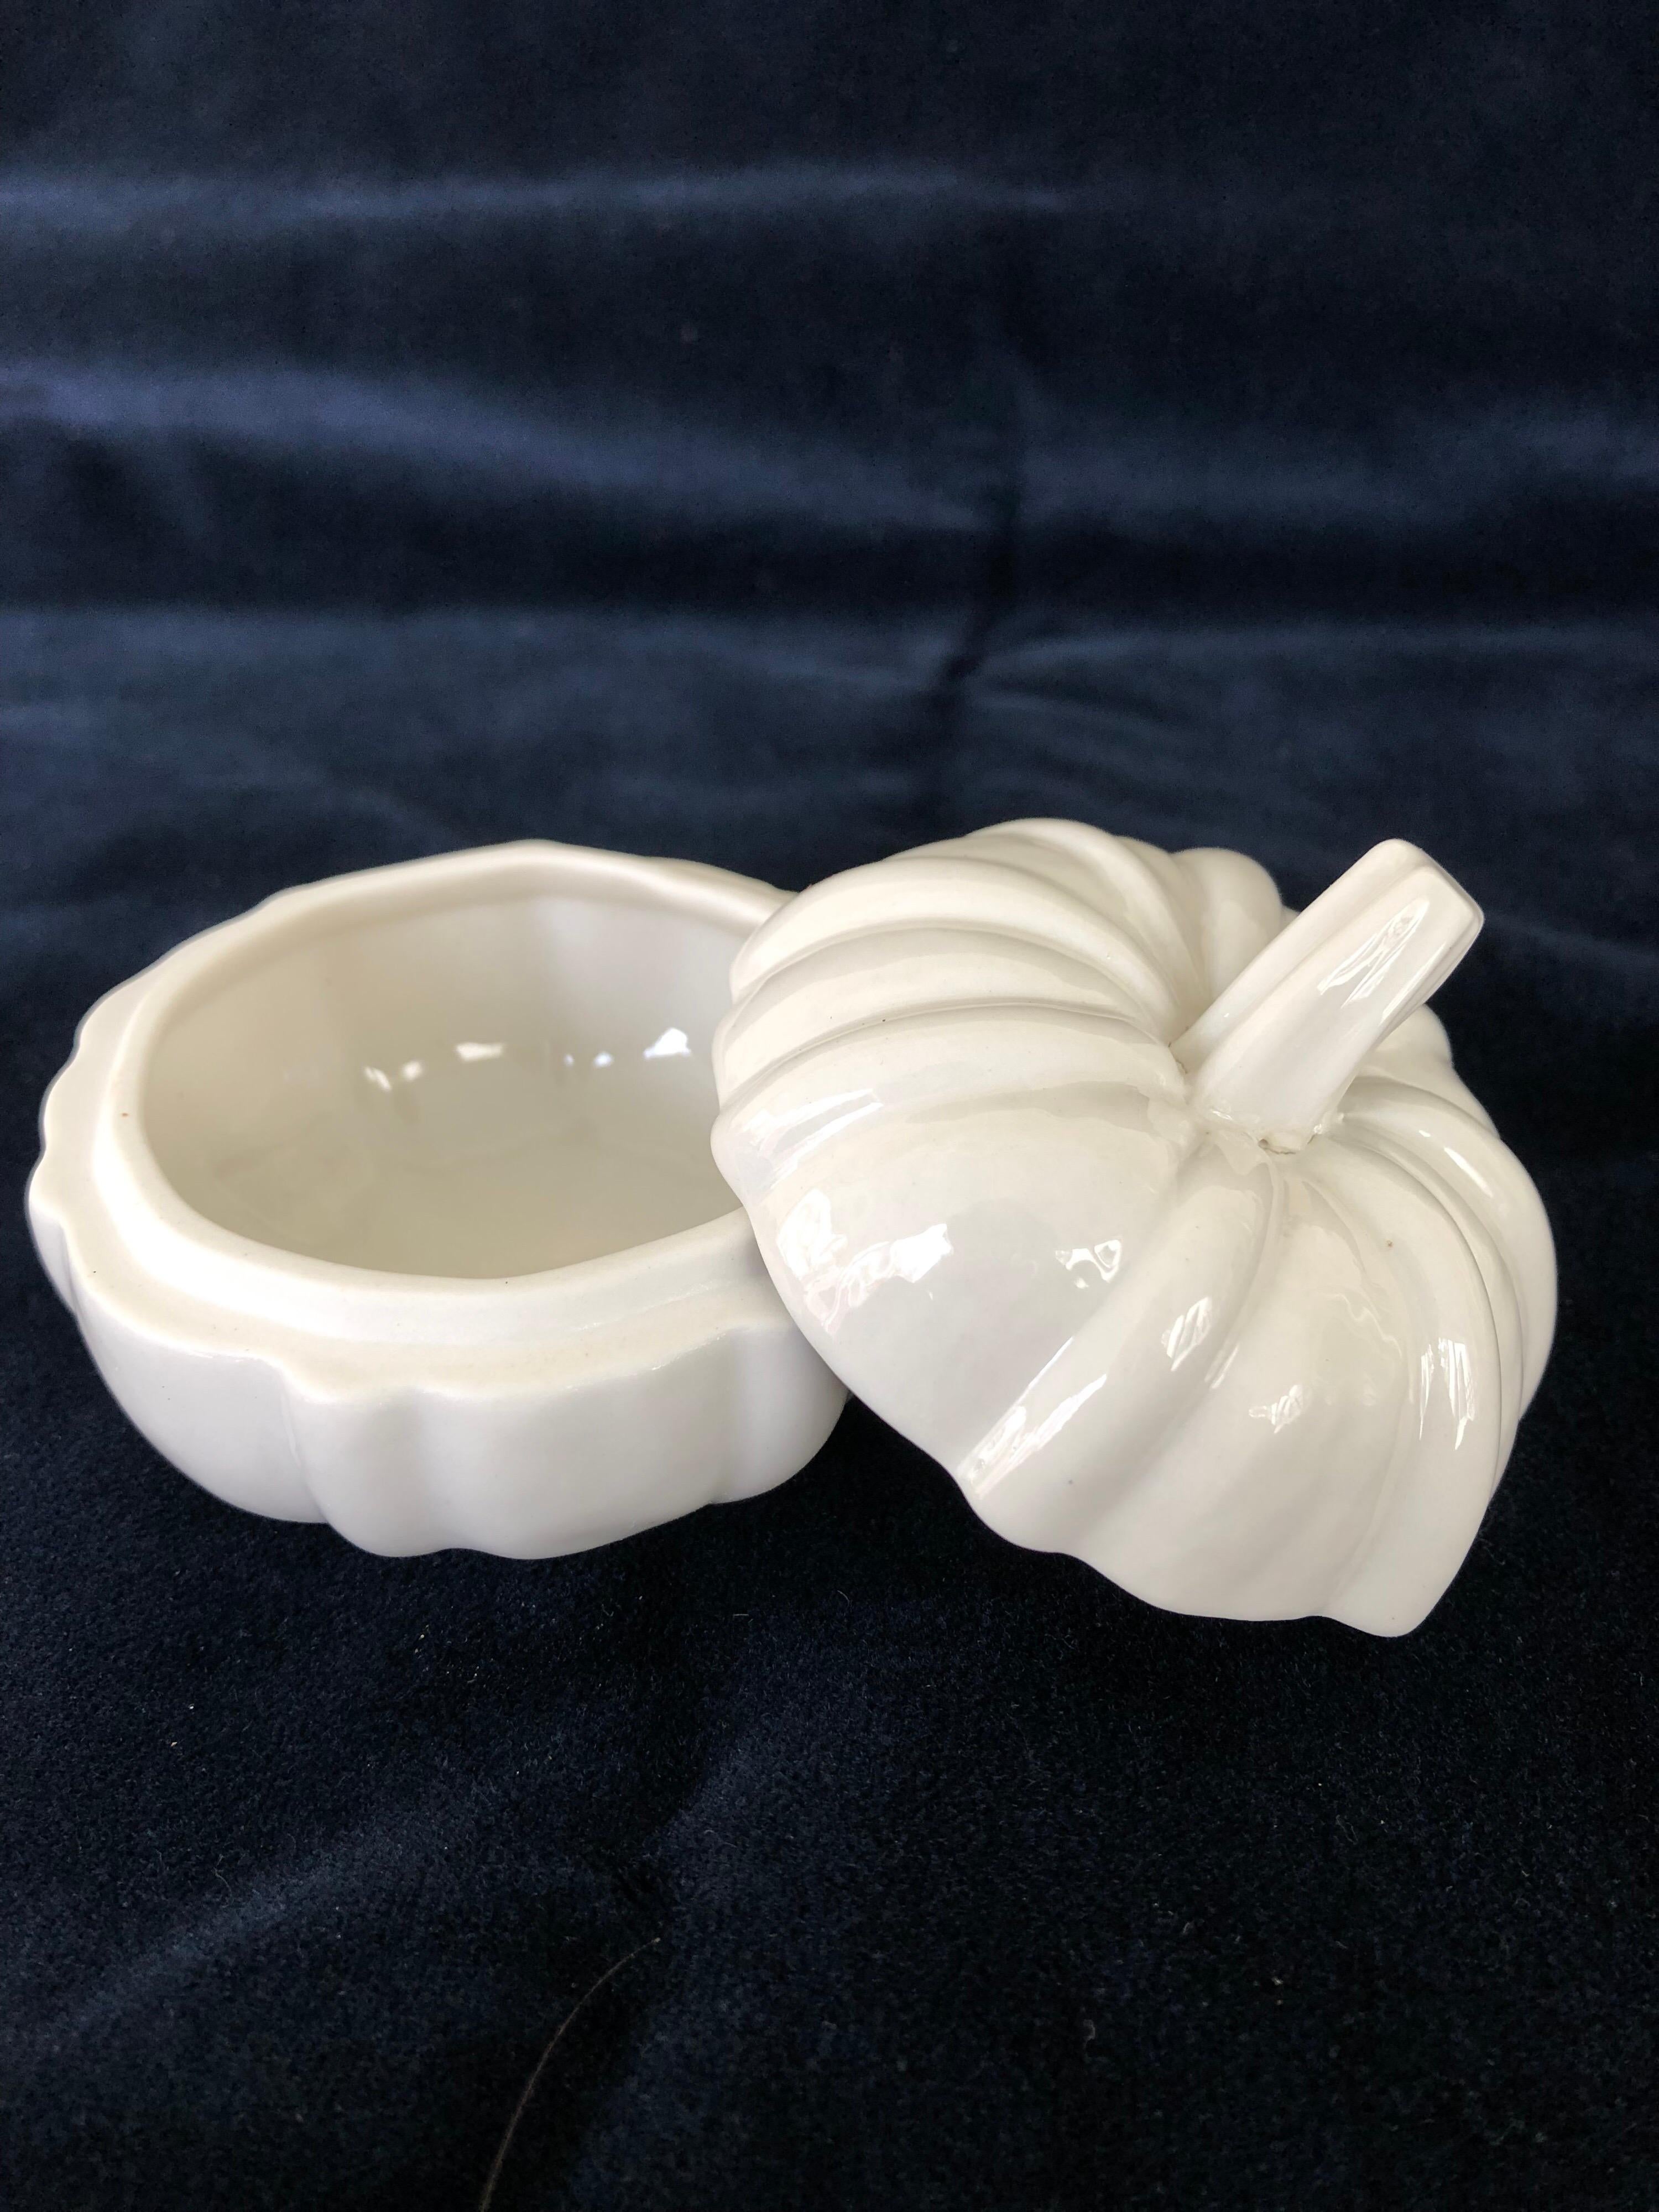 Bone China pumpkin shaped lidded boudoir or dressing table pin box. Purchased 1960s from Tiffany & Co.